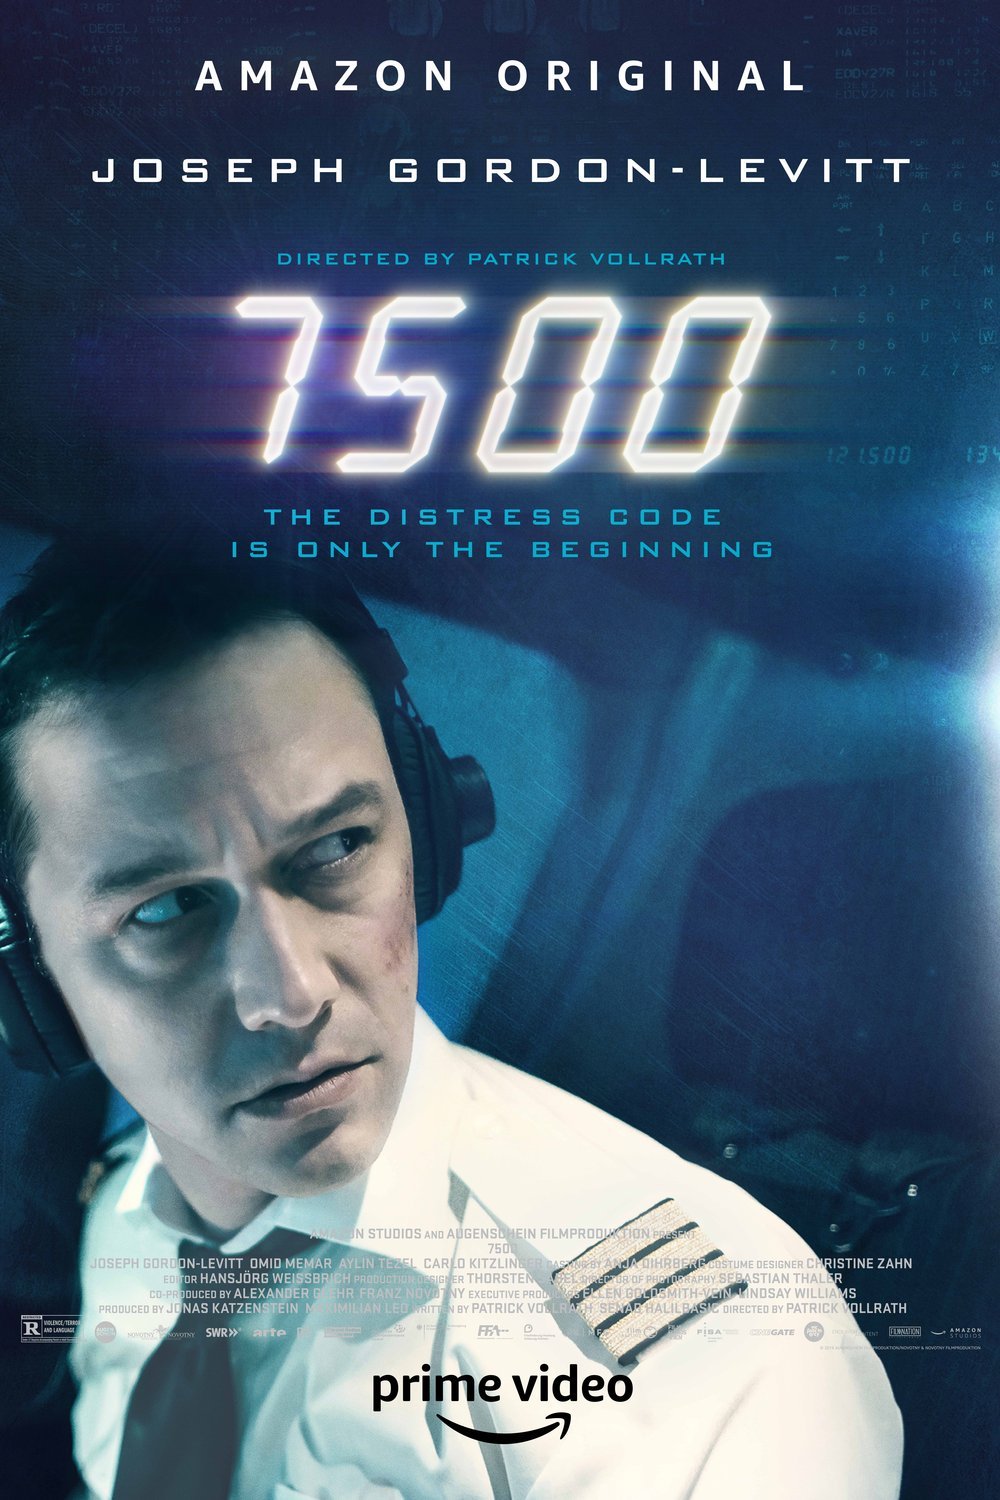 Poster of the movie 7500